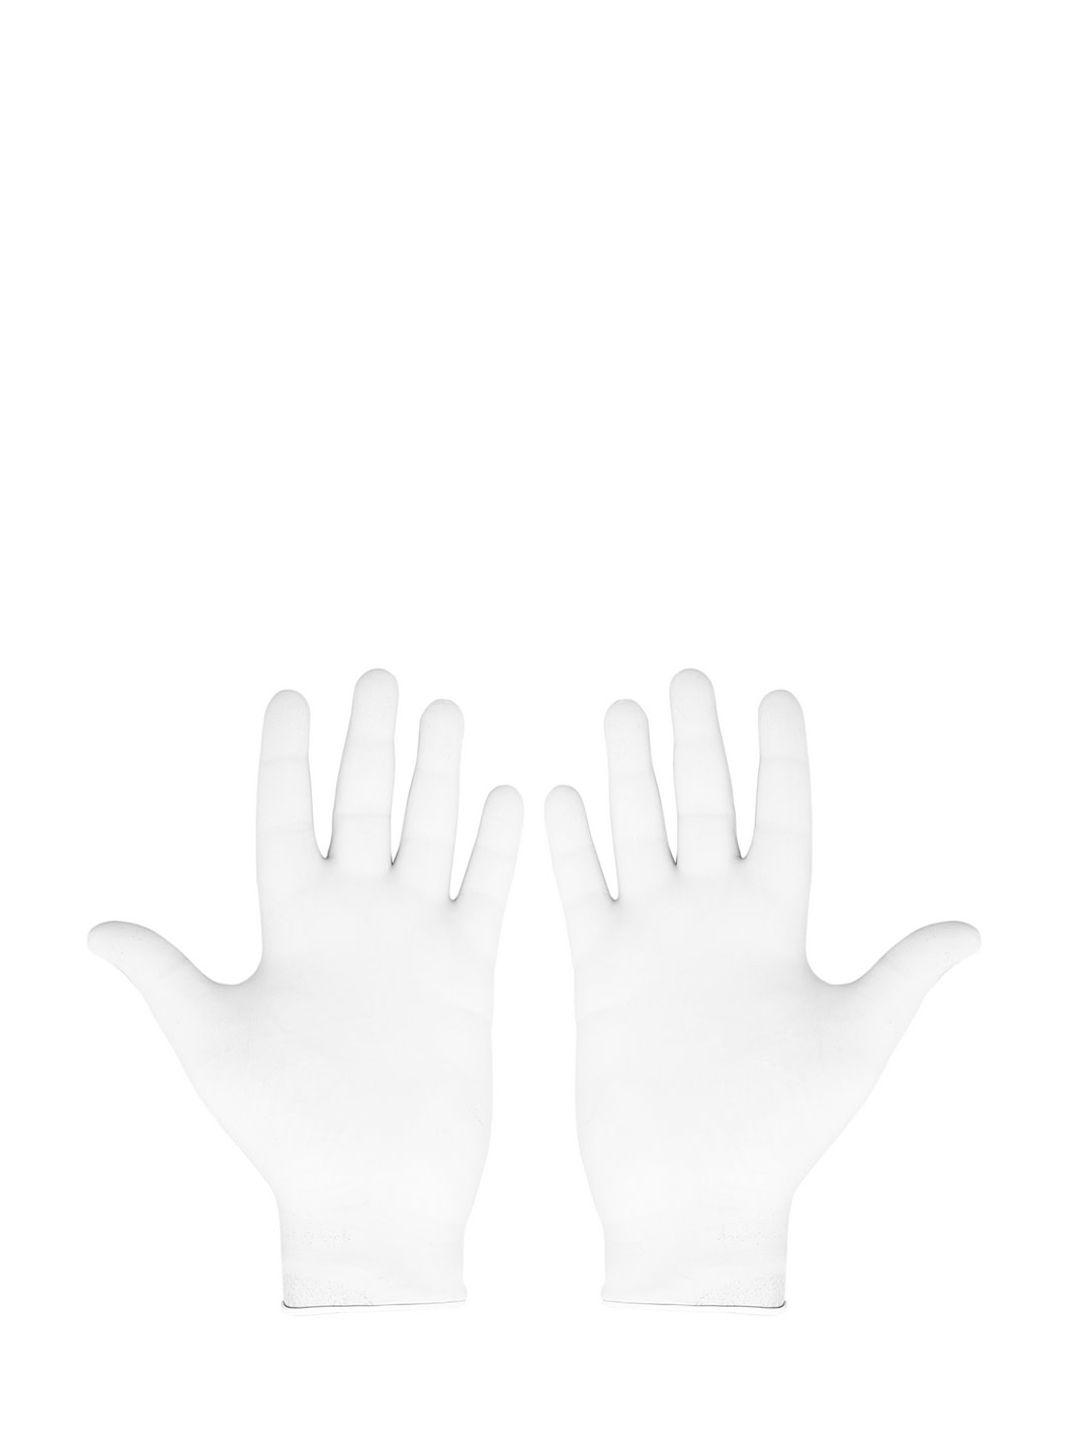 london fashion hob  pack of 50 disposable hand  gloves